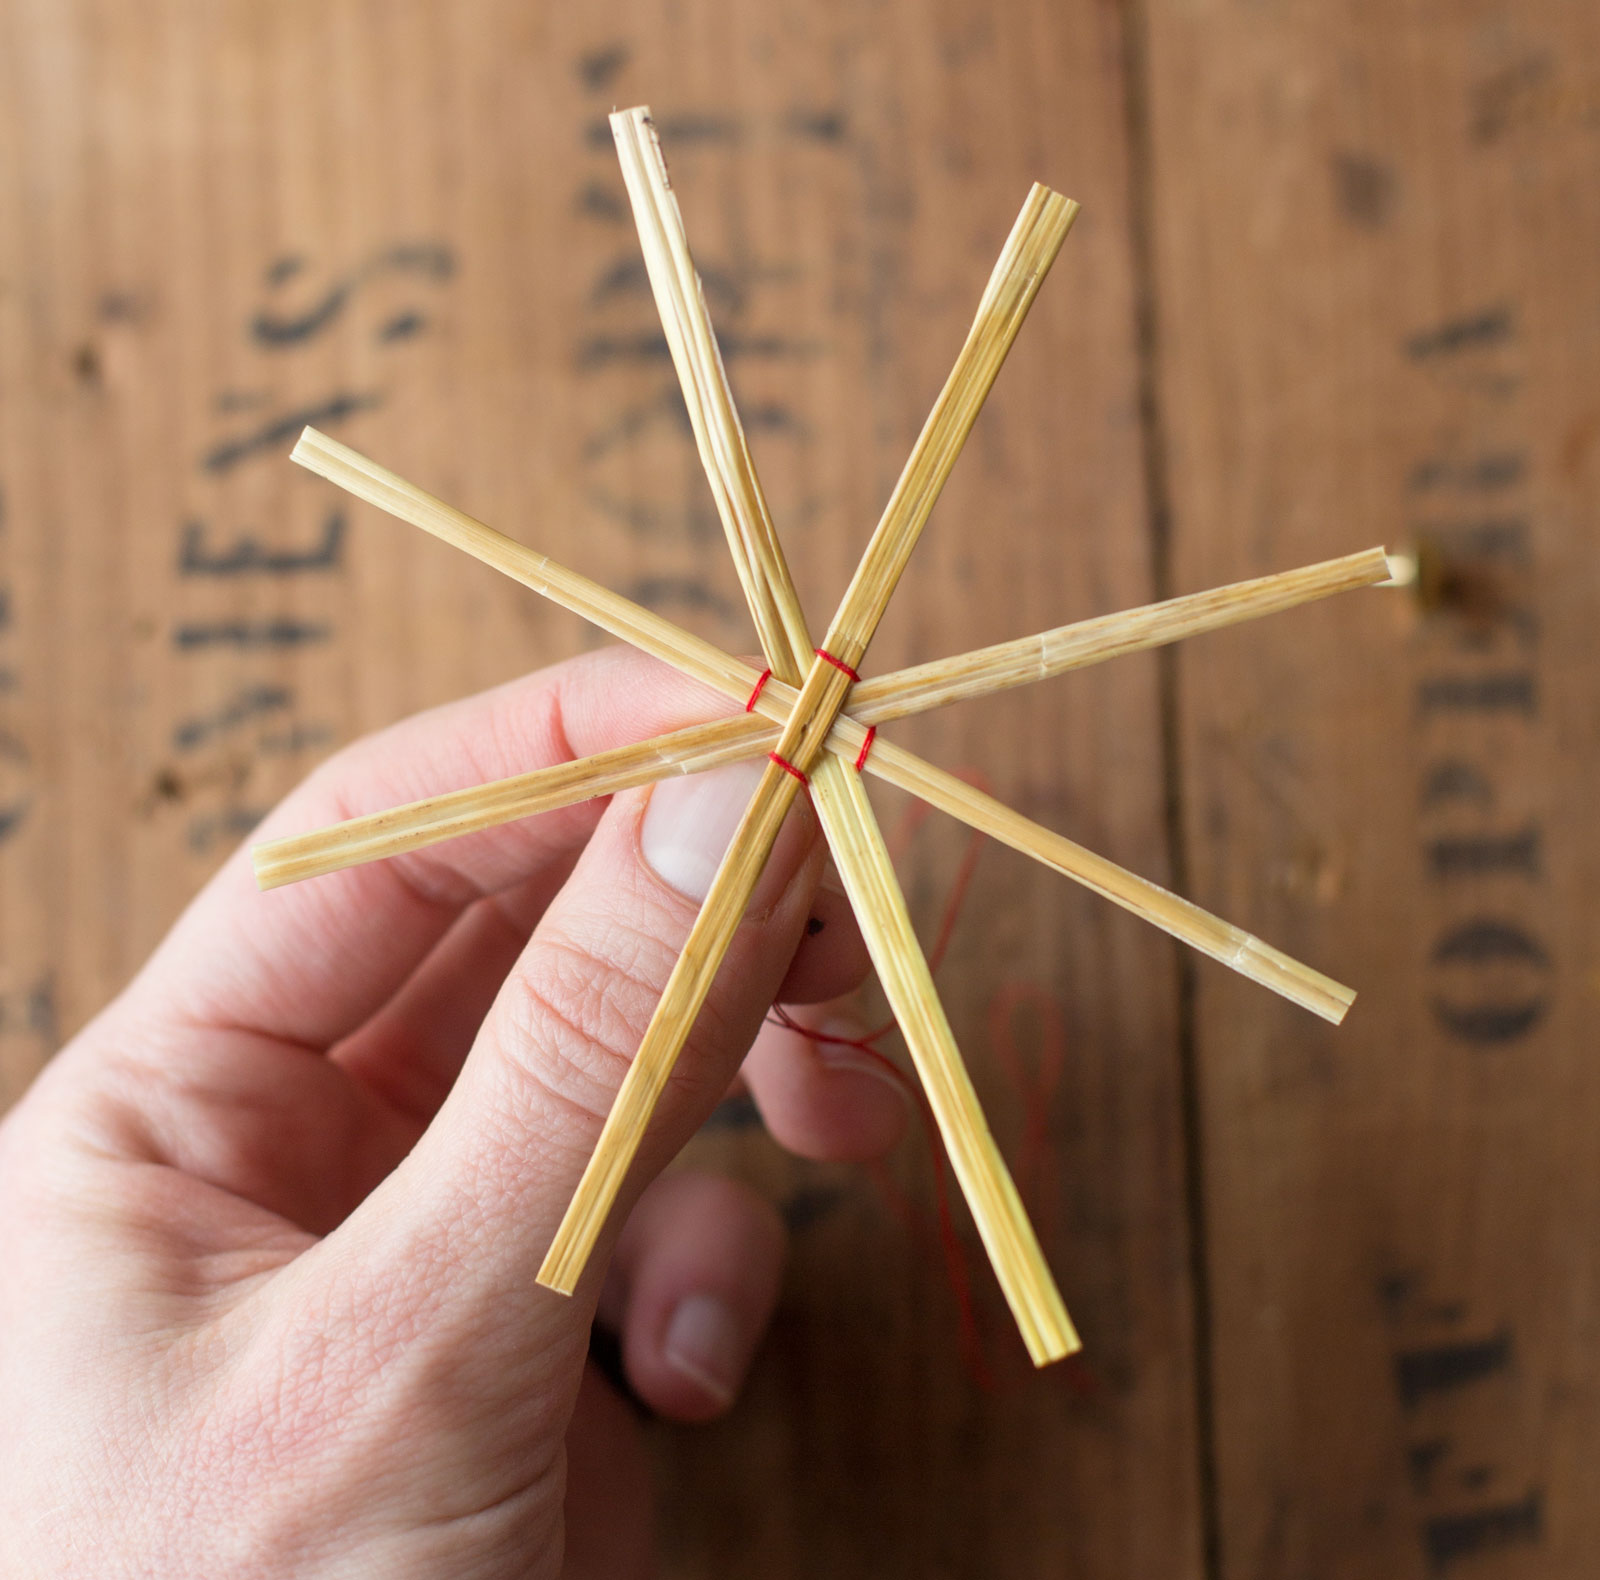 Paper Straw Star Decorations - DIY Tutorial by